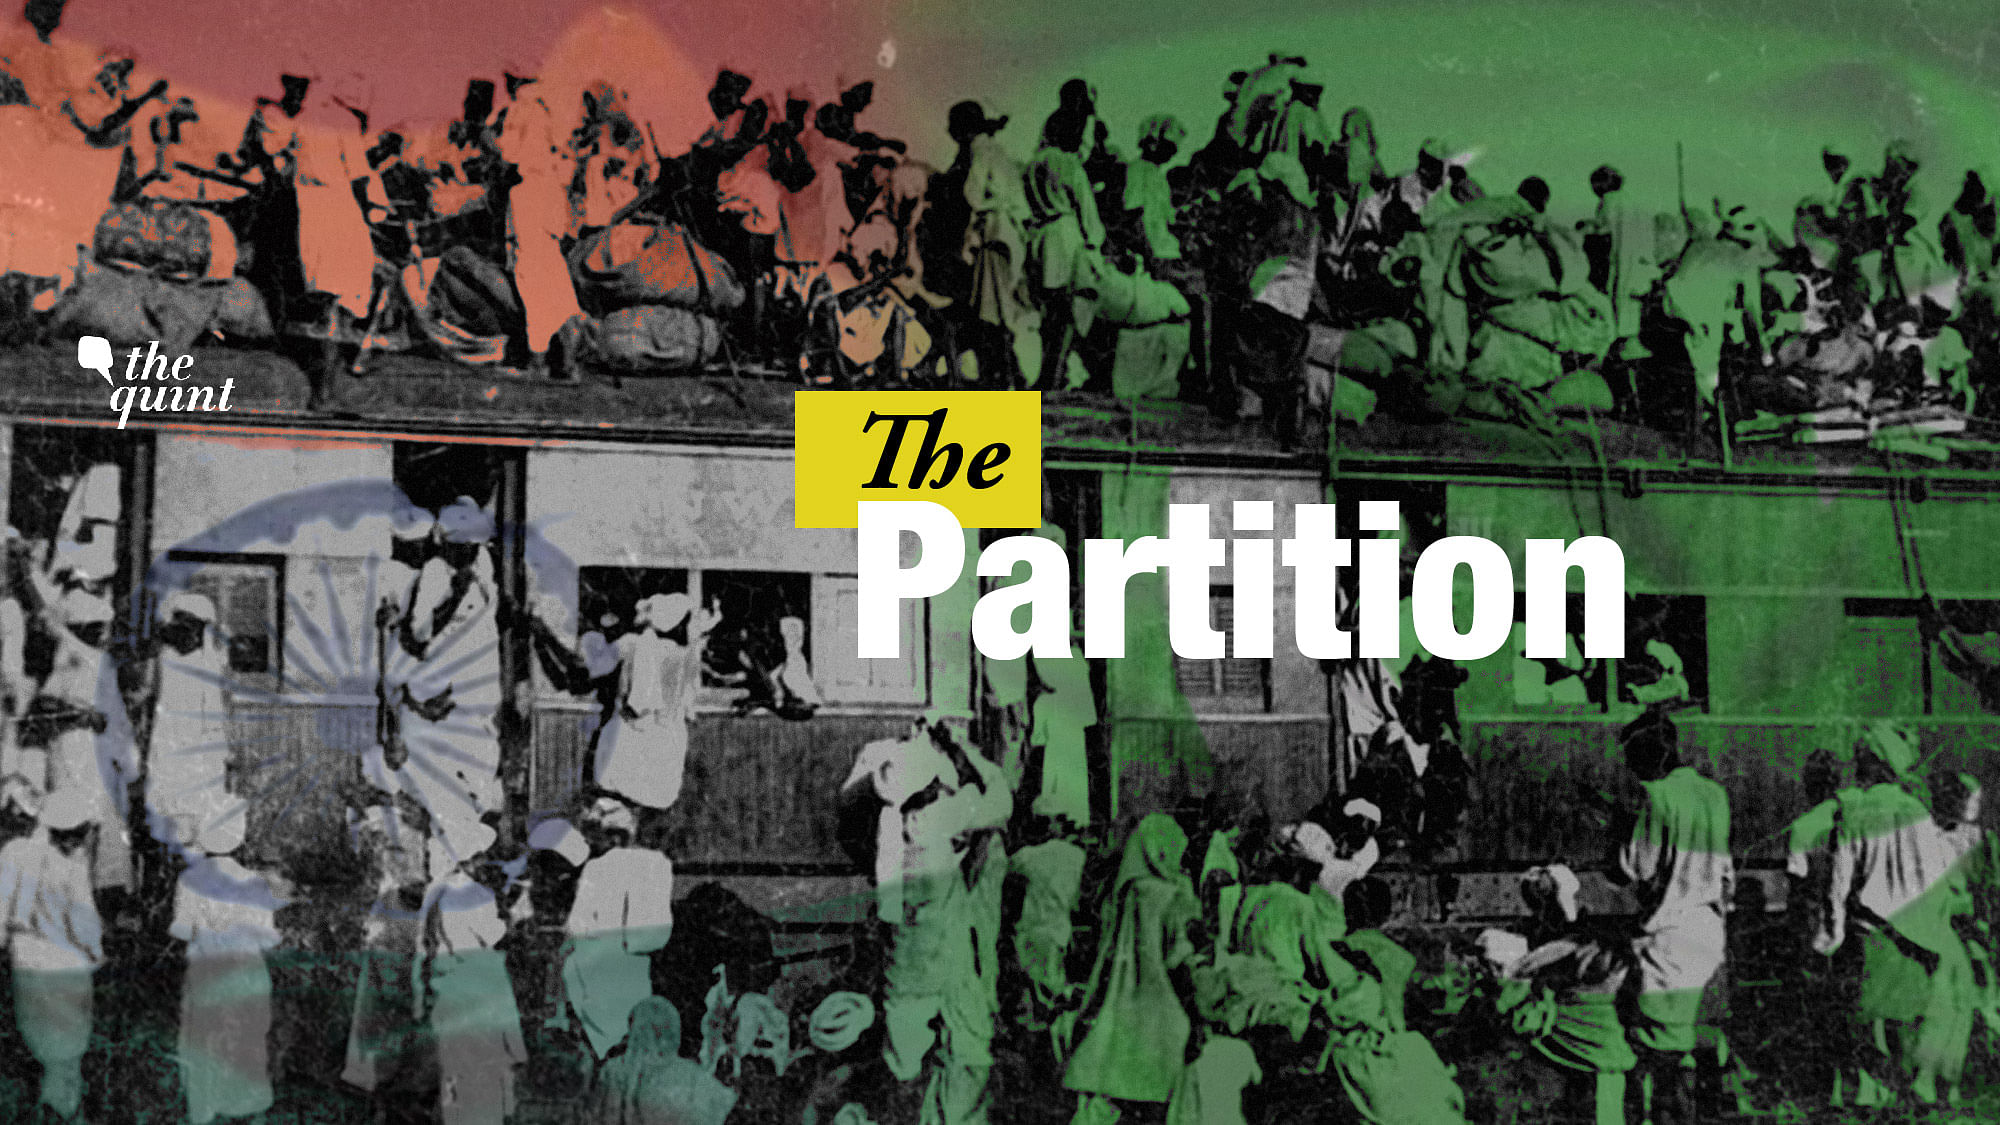 Listen to the stories from the families who  chose to stay back in India when the country was divided in 1947